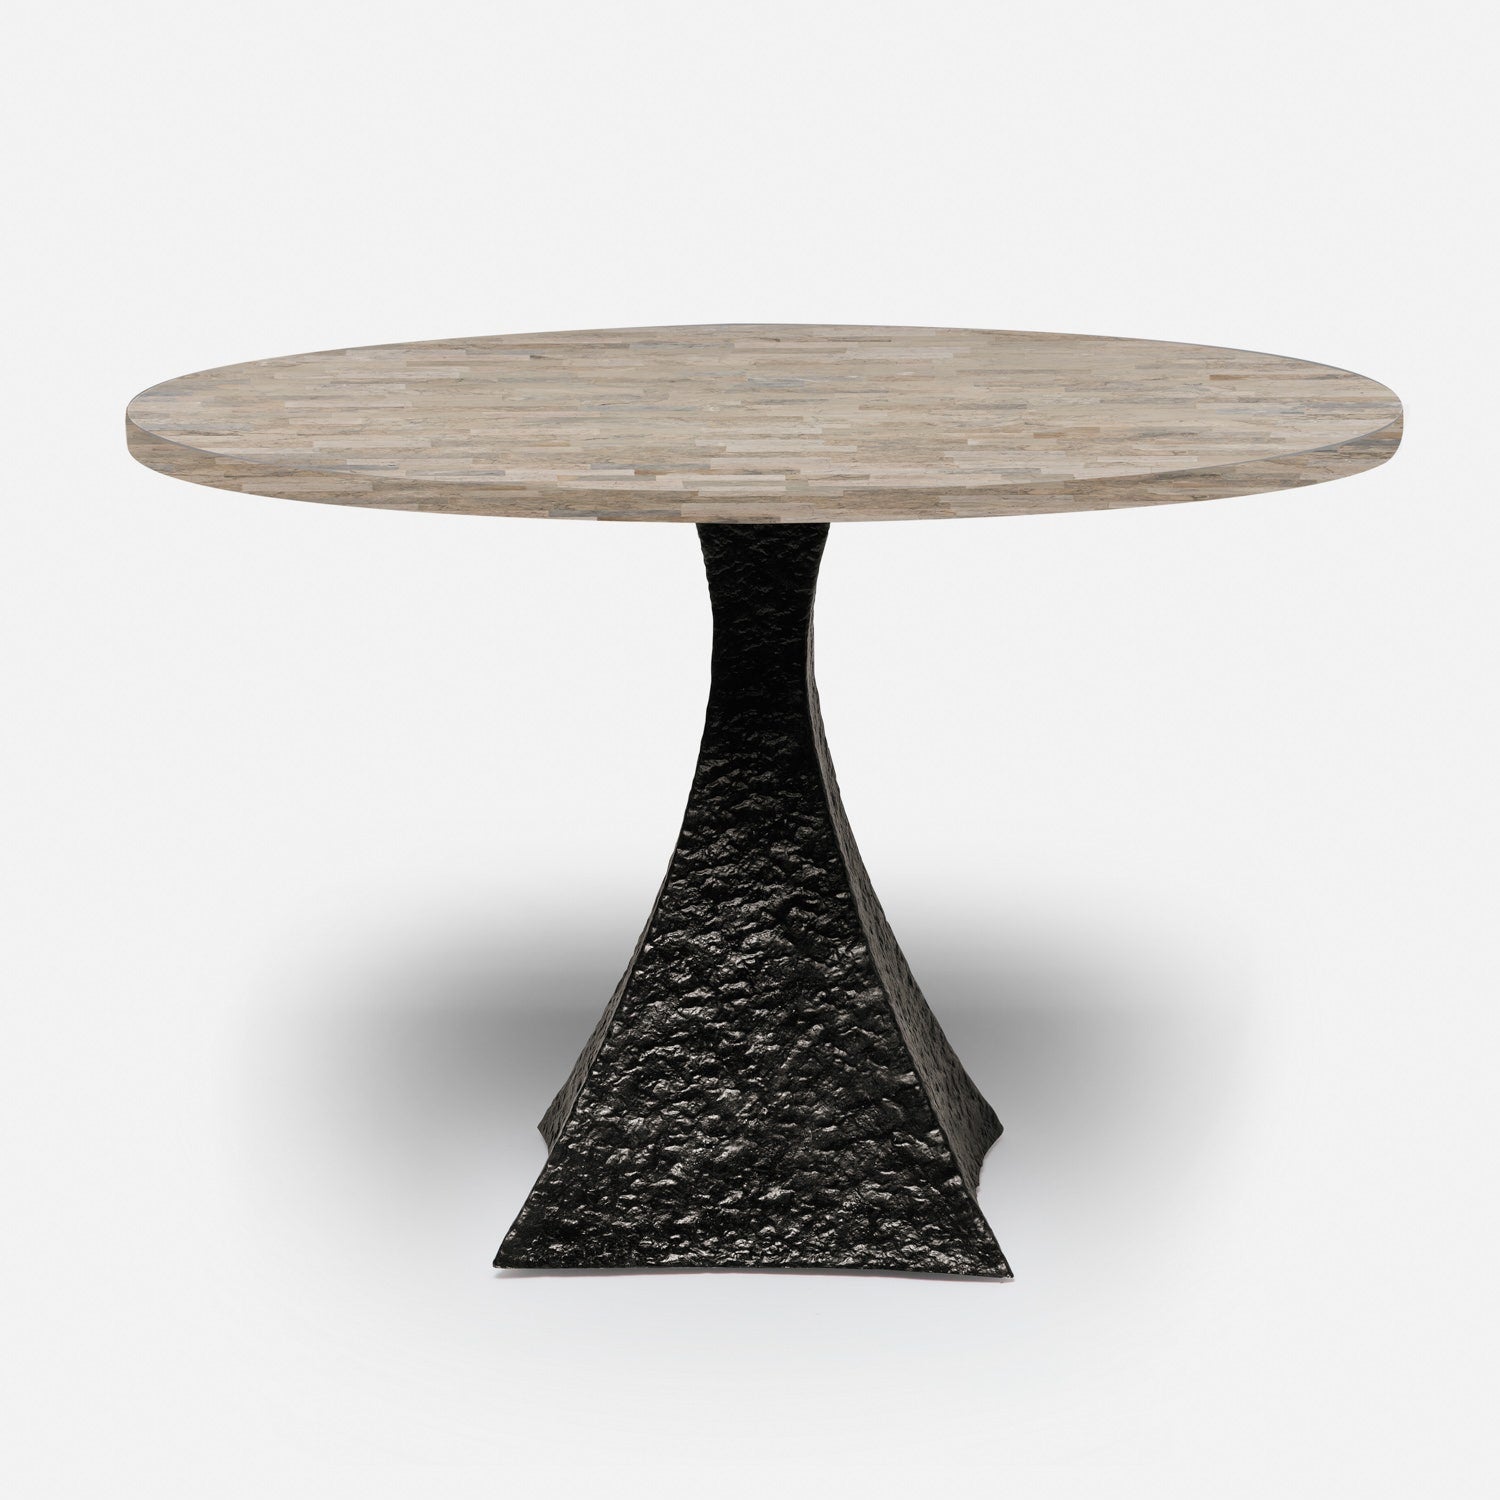 Made Goods Noor 54" x 30" Bumpy Black Iron Dinning Table With Round Warm Gray Marble Table Top